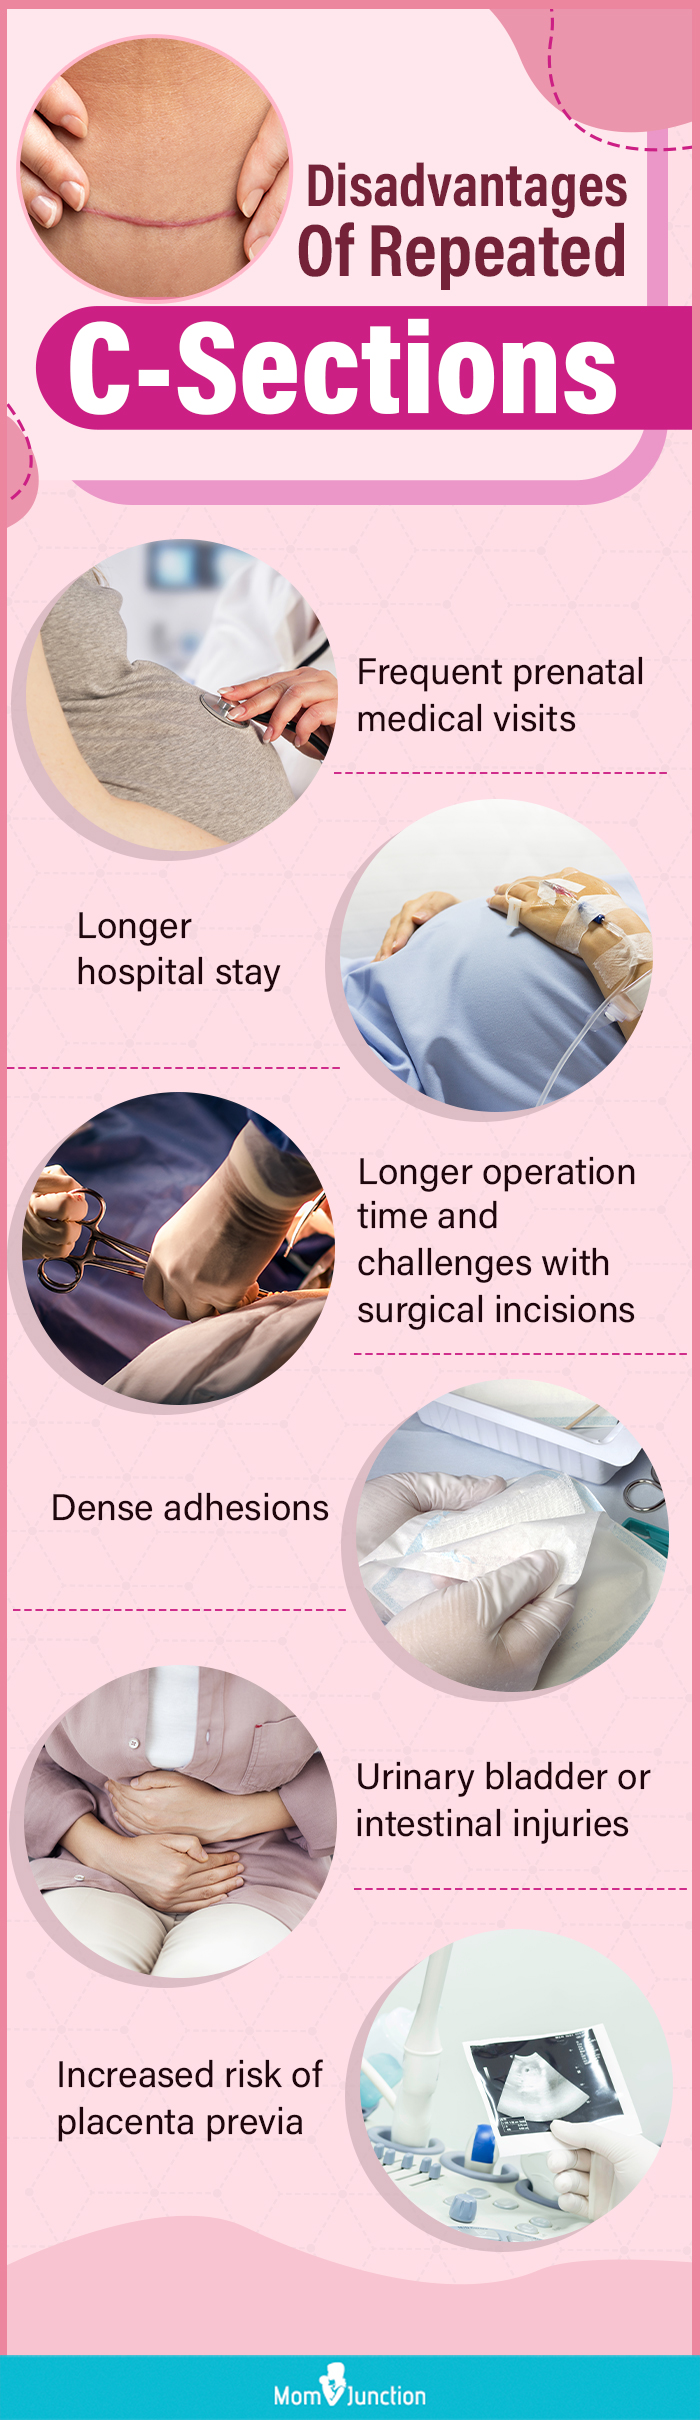 https://www.momjunction.com/wp-content/uploads/2023/05/Disadvantages-Of-Repeated-C-Sections.jpg